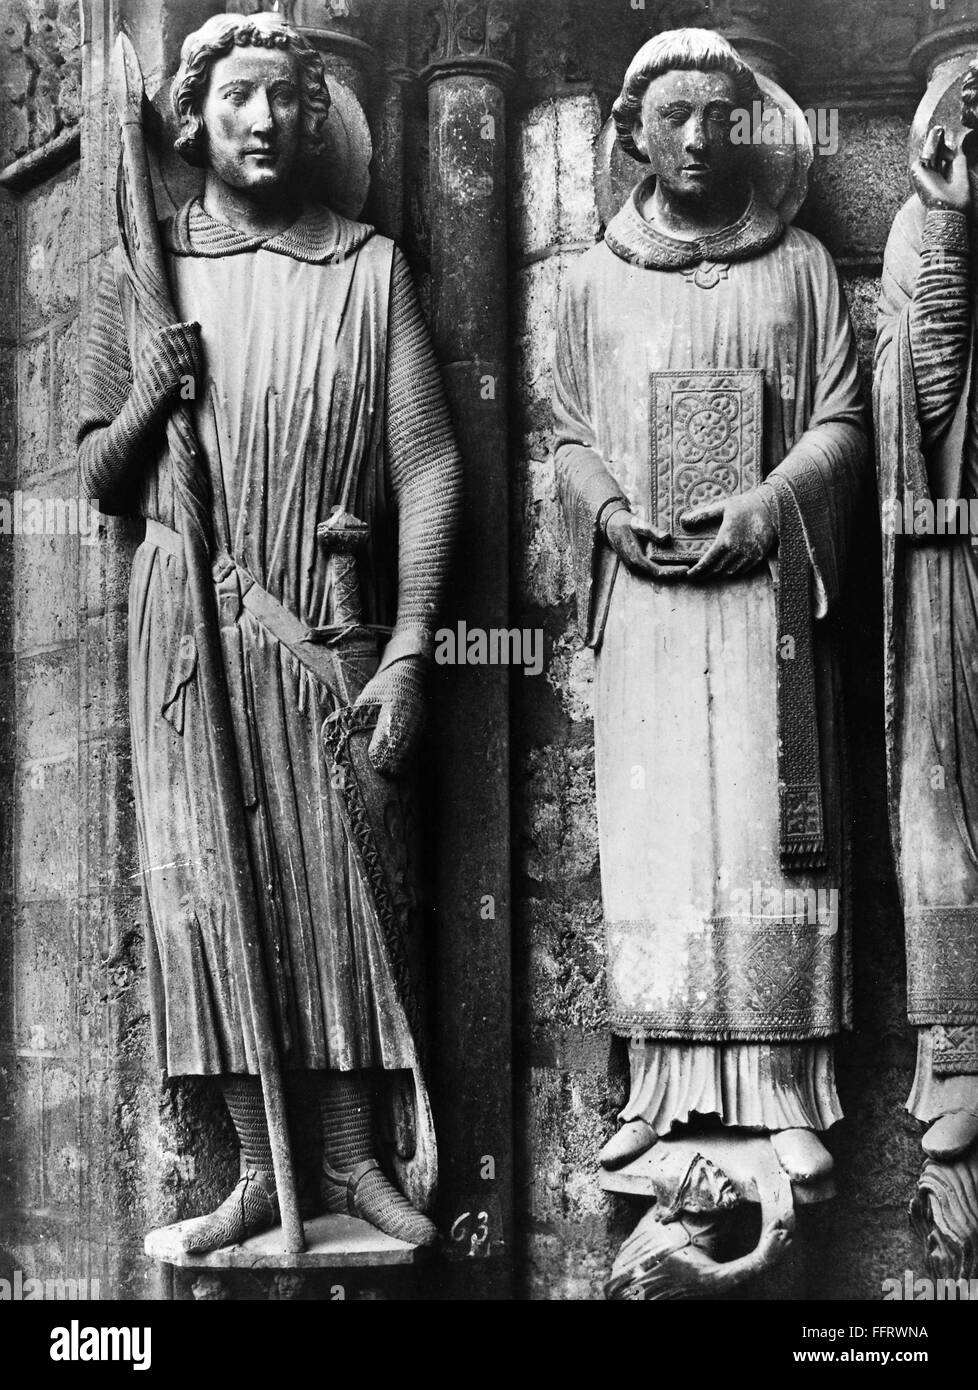 CHARTRES CATHEDRAL. /nSt. Theodore and St. Etienne. Figures, 13th century, from the south portal of Chartres Cathedral, France. Photograph, mid-20th century. Stock Photo